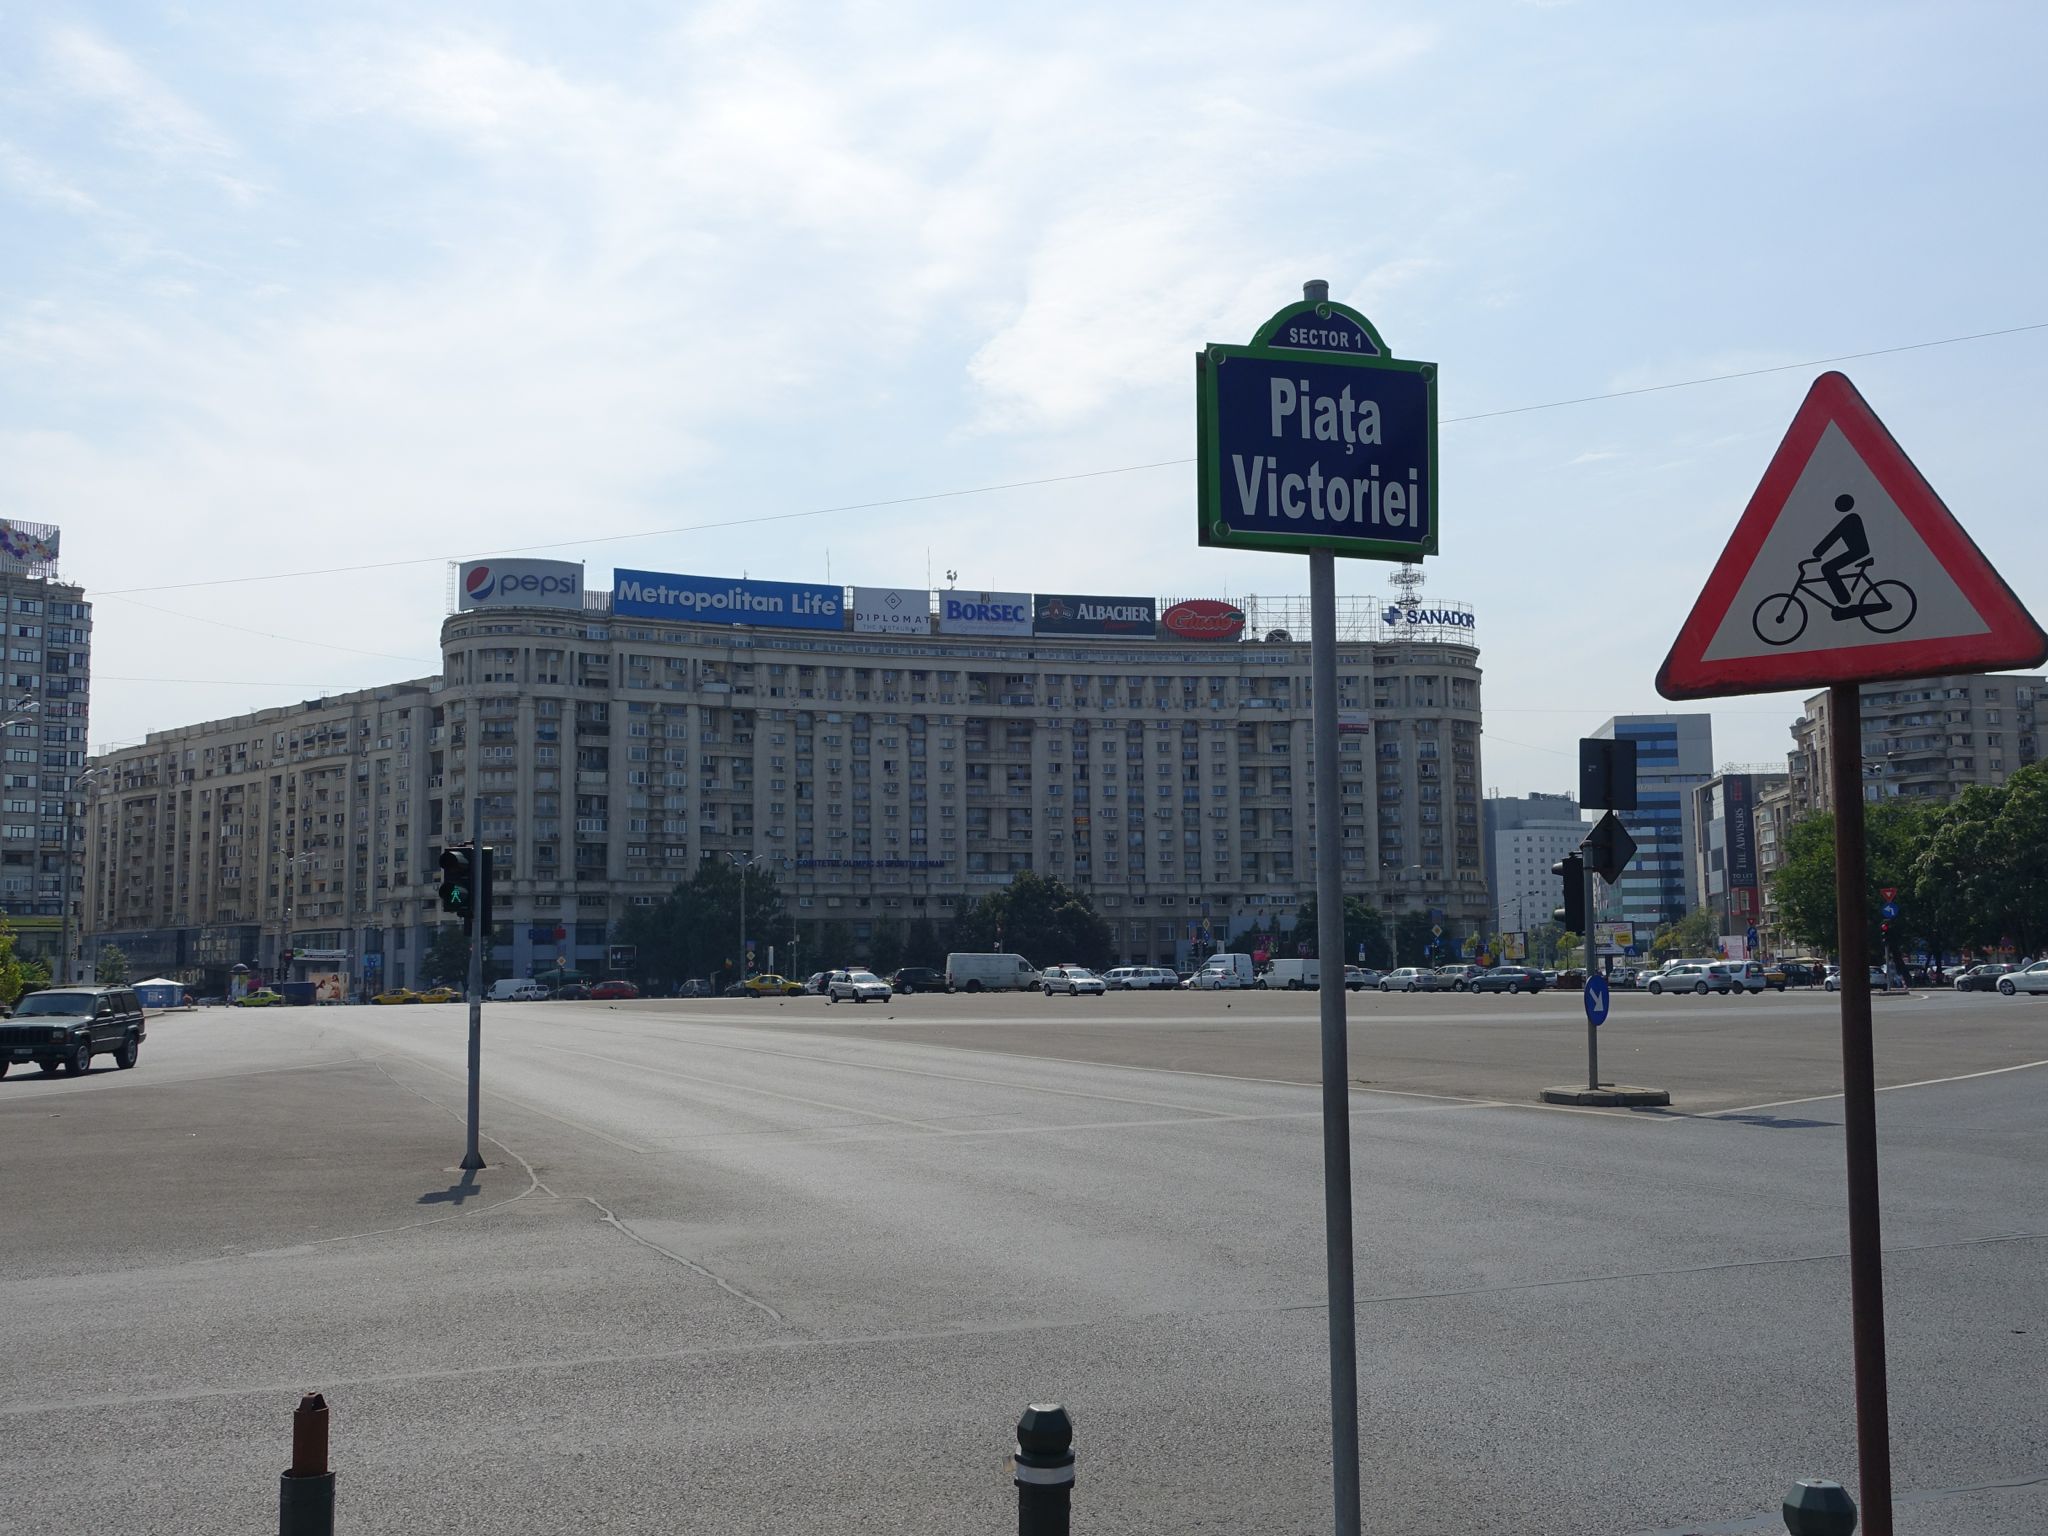 Photo 117 of 133 from the album Highlights Bucharest 2014.